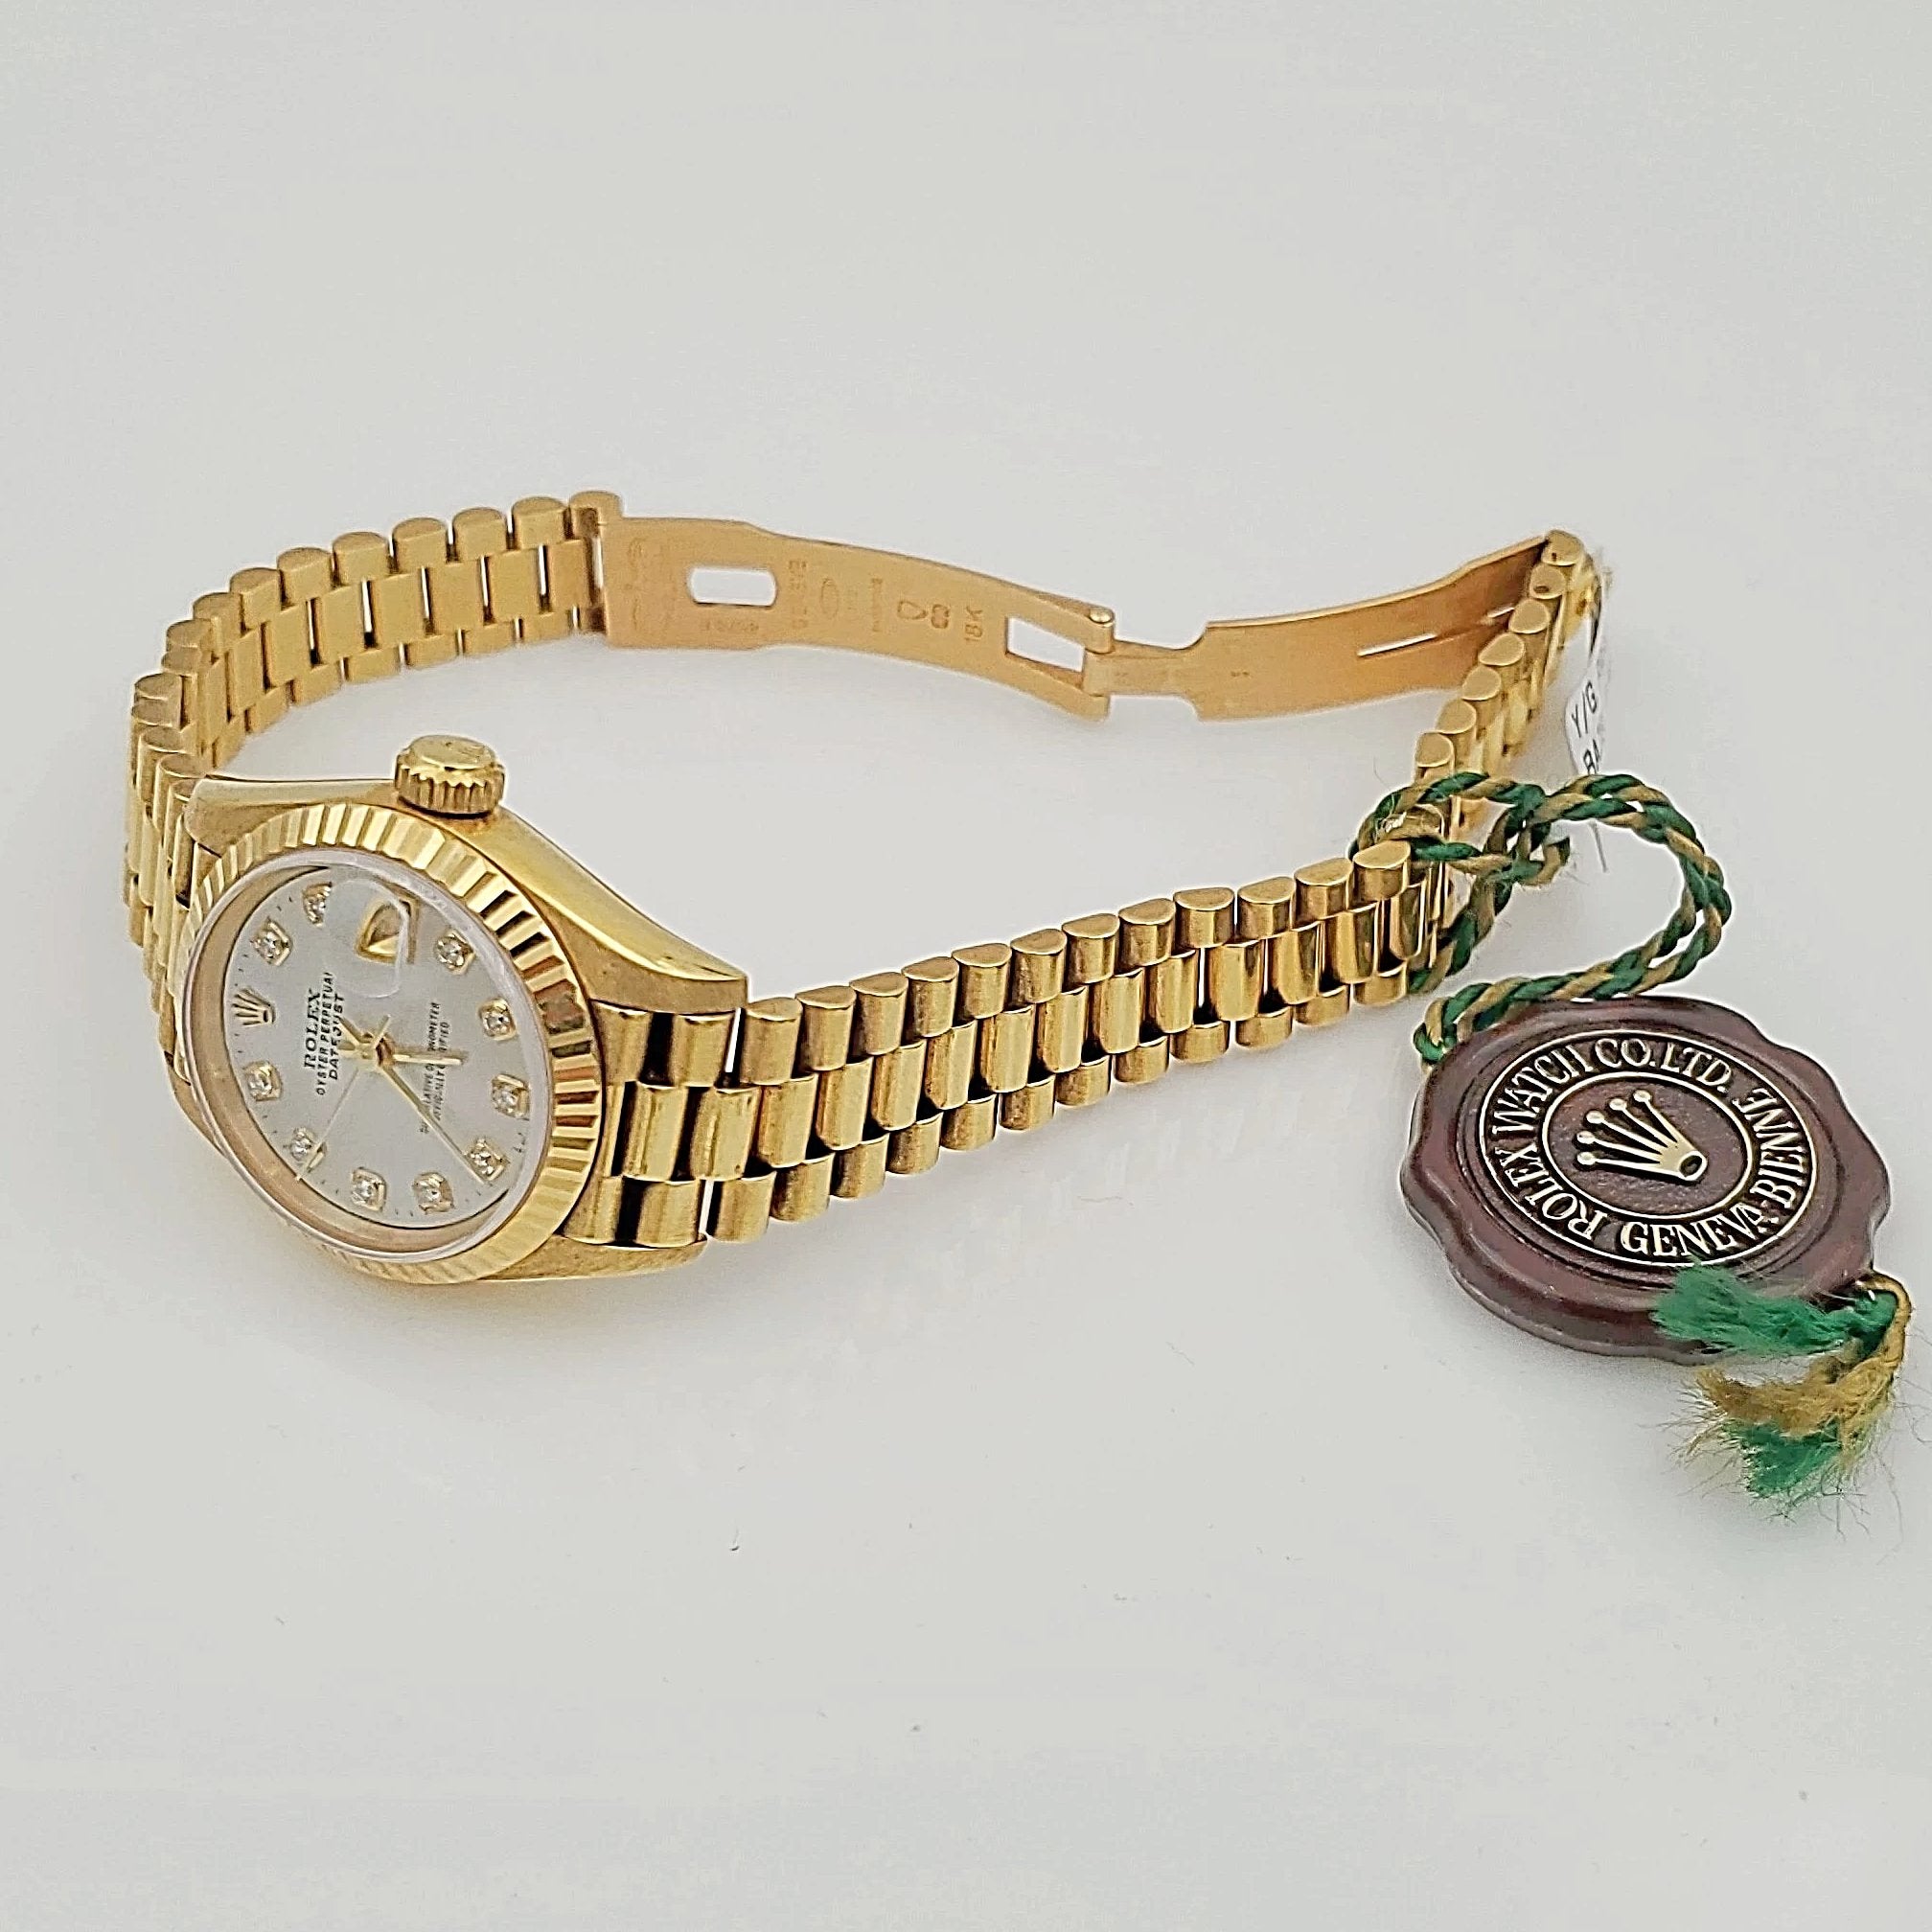 Ladies Rolex 26mm Presidential 18K Solid Yellow Gold Watch with Mother of Pearl Diamond Dial and Fluted Bezel. (Pre-Owned)